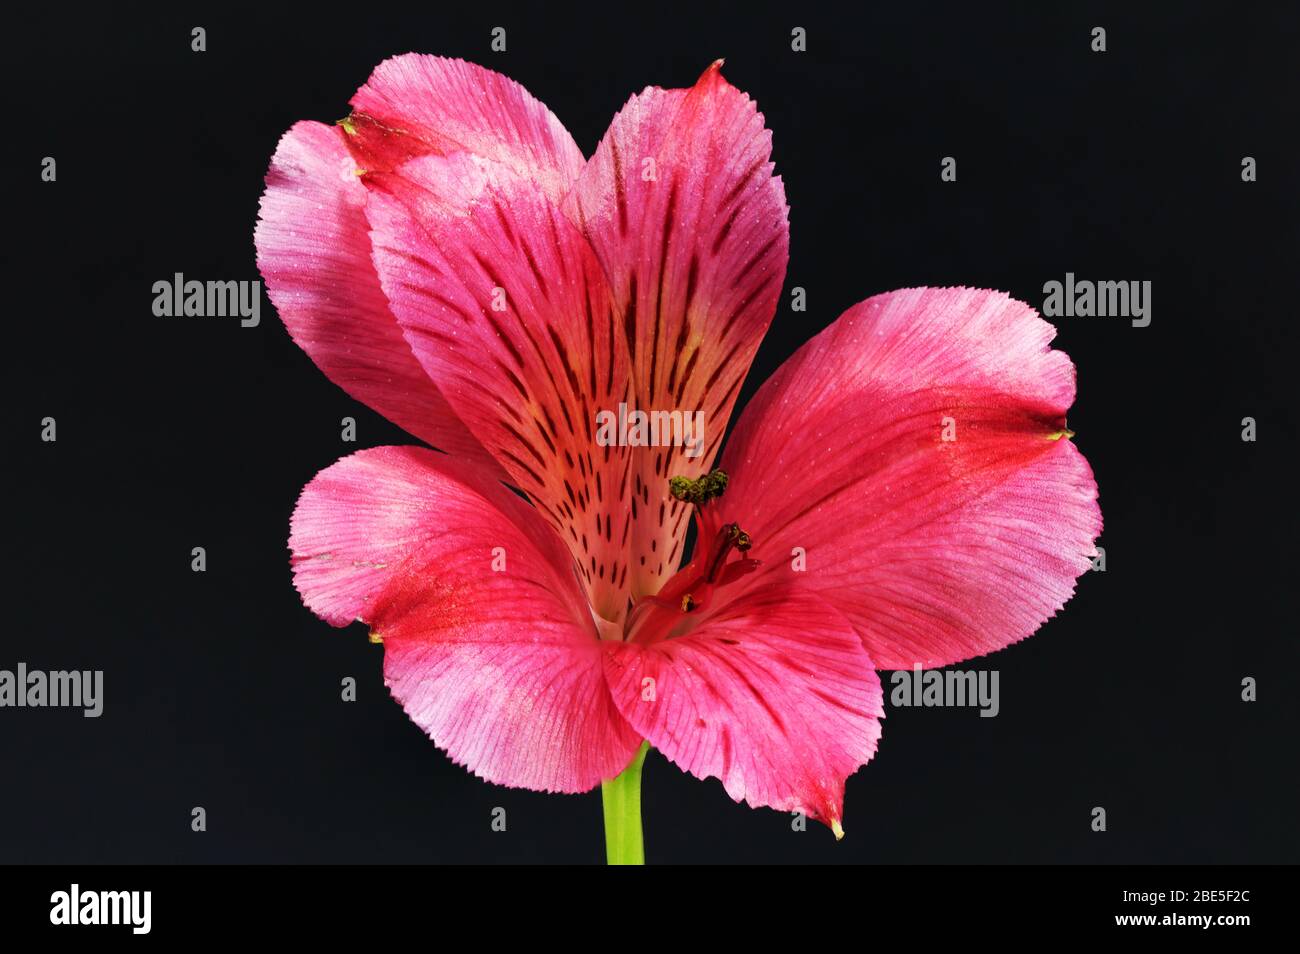 Close up on a red Alstroemeria flower head with a black background Stock Photo